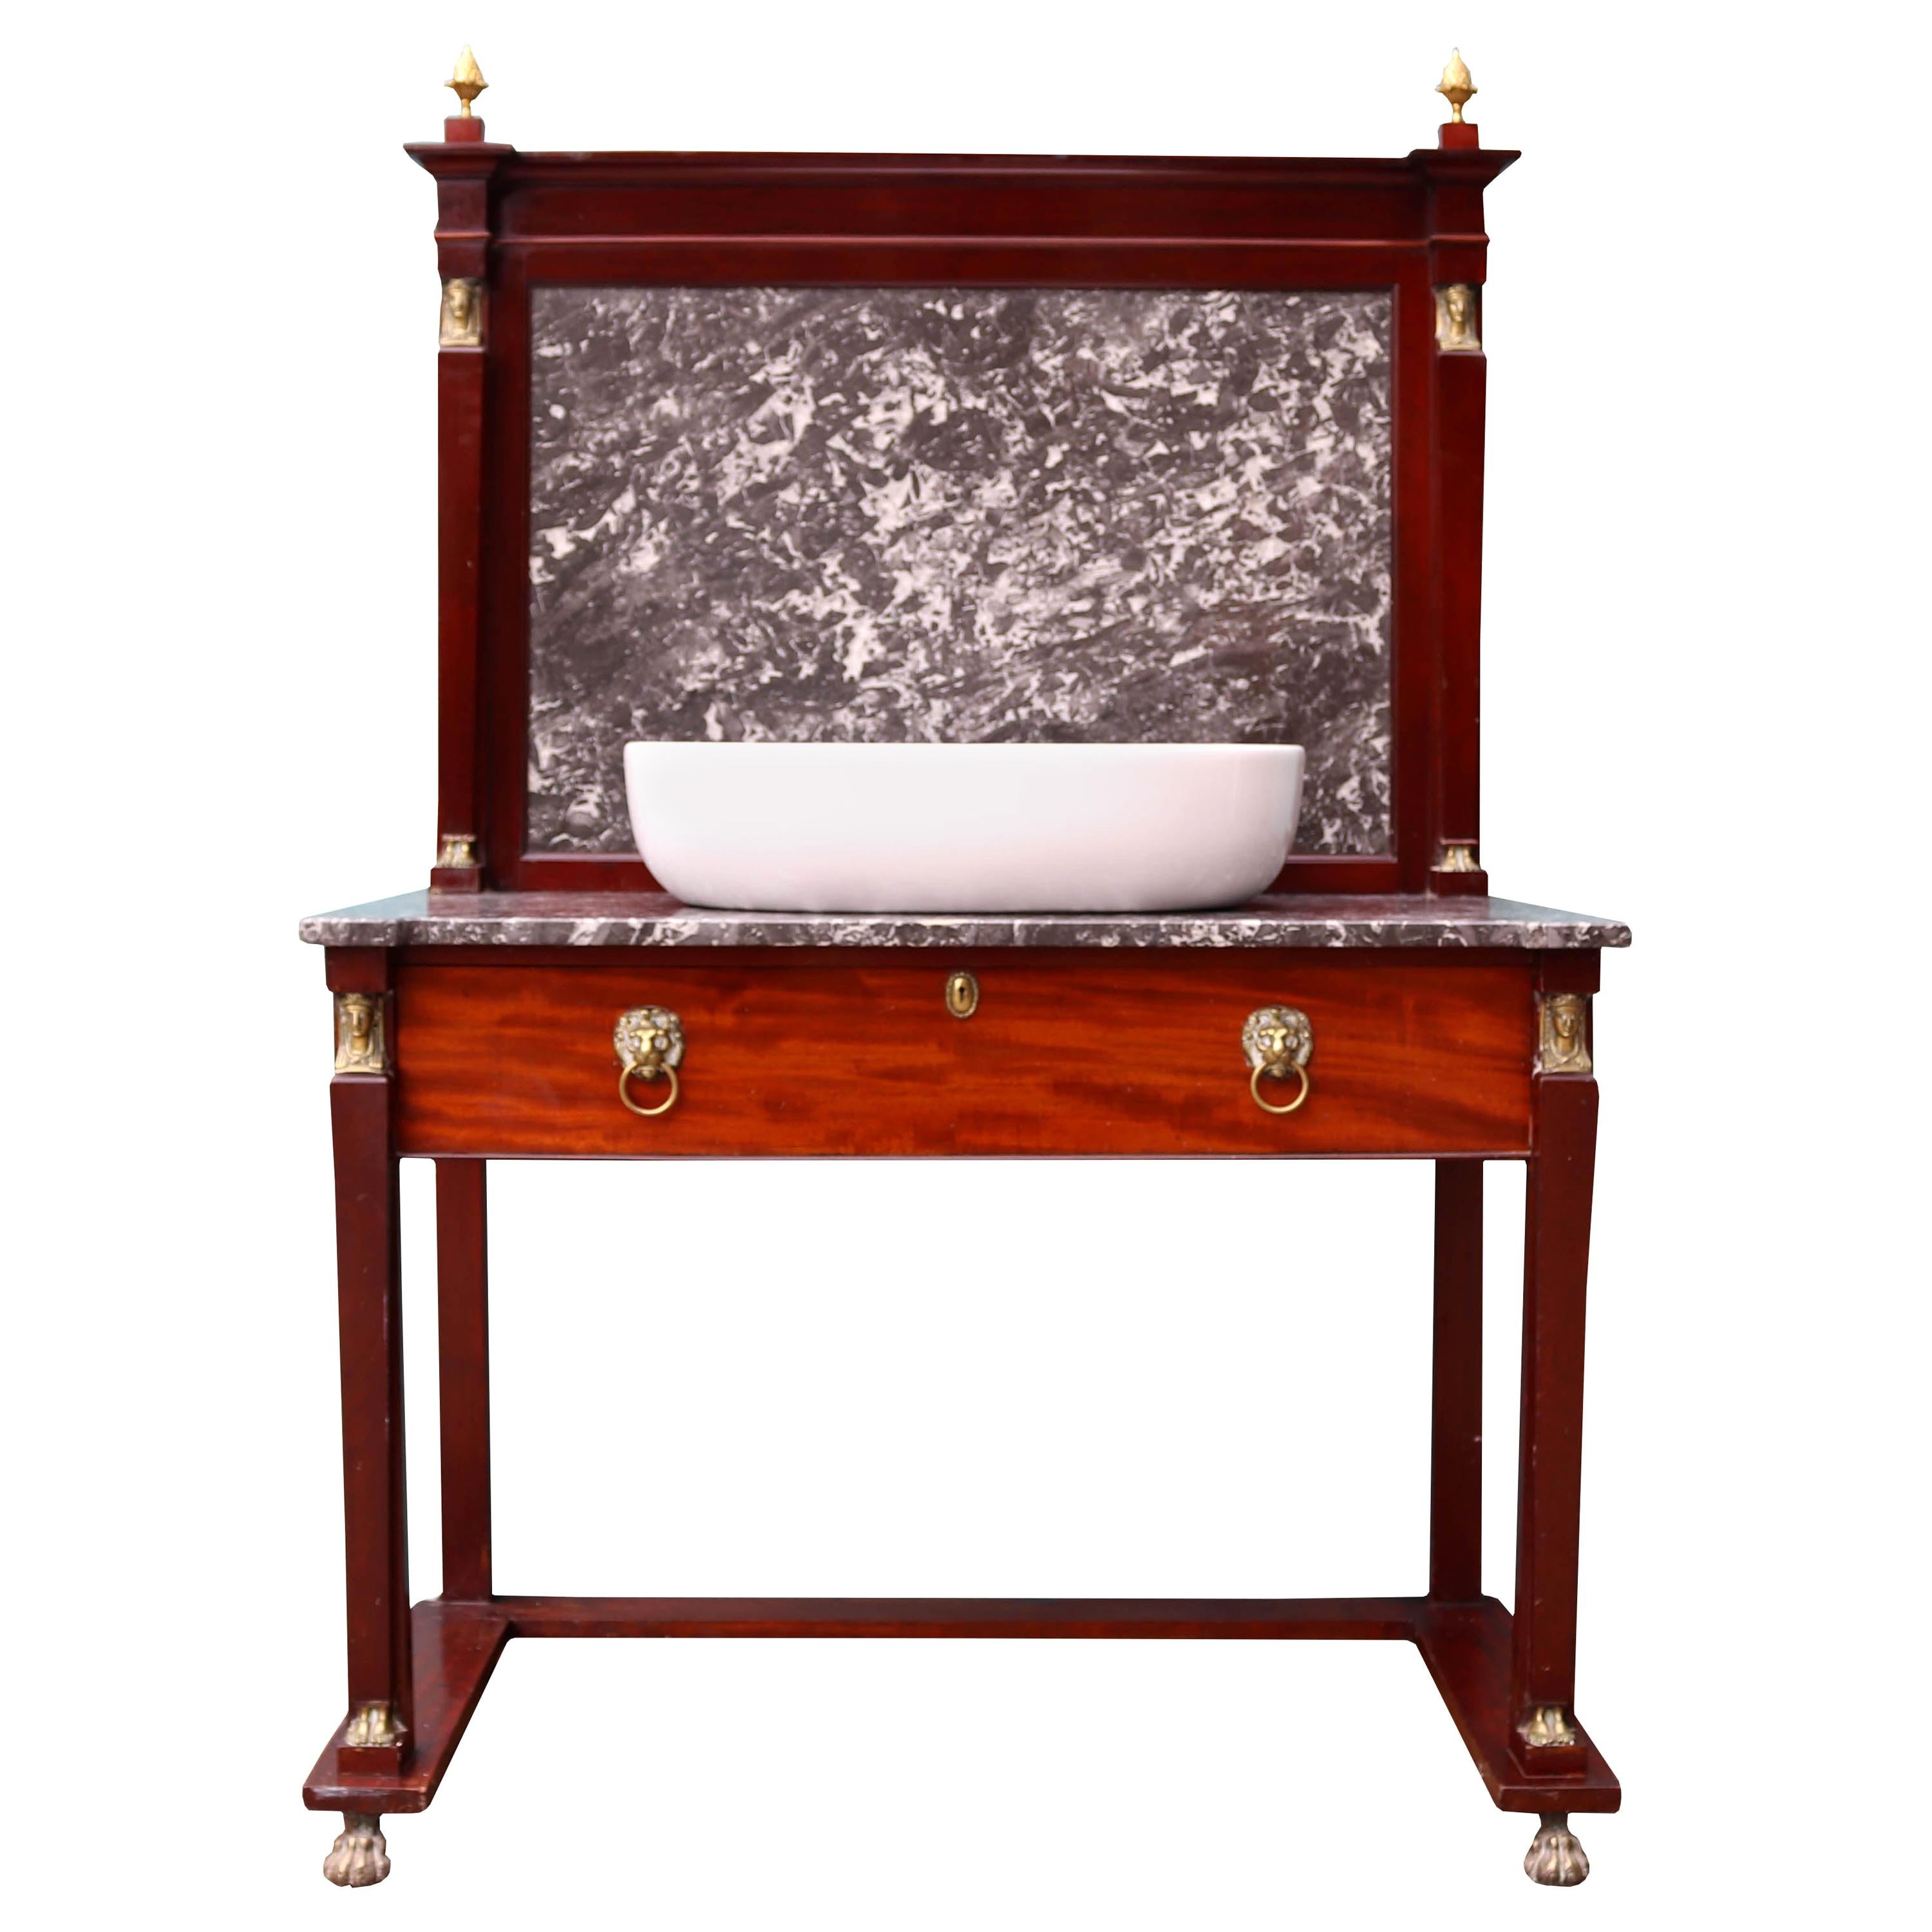 Antique Empire Style Wash Stand